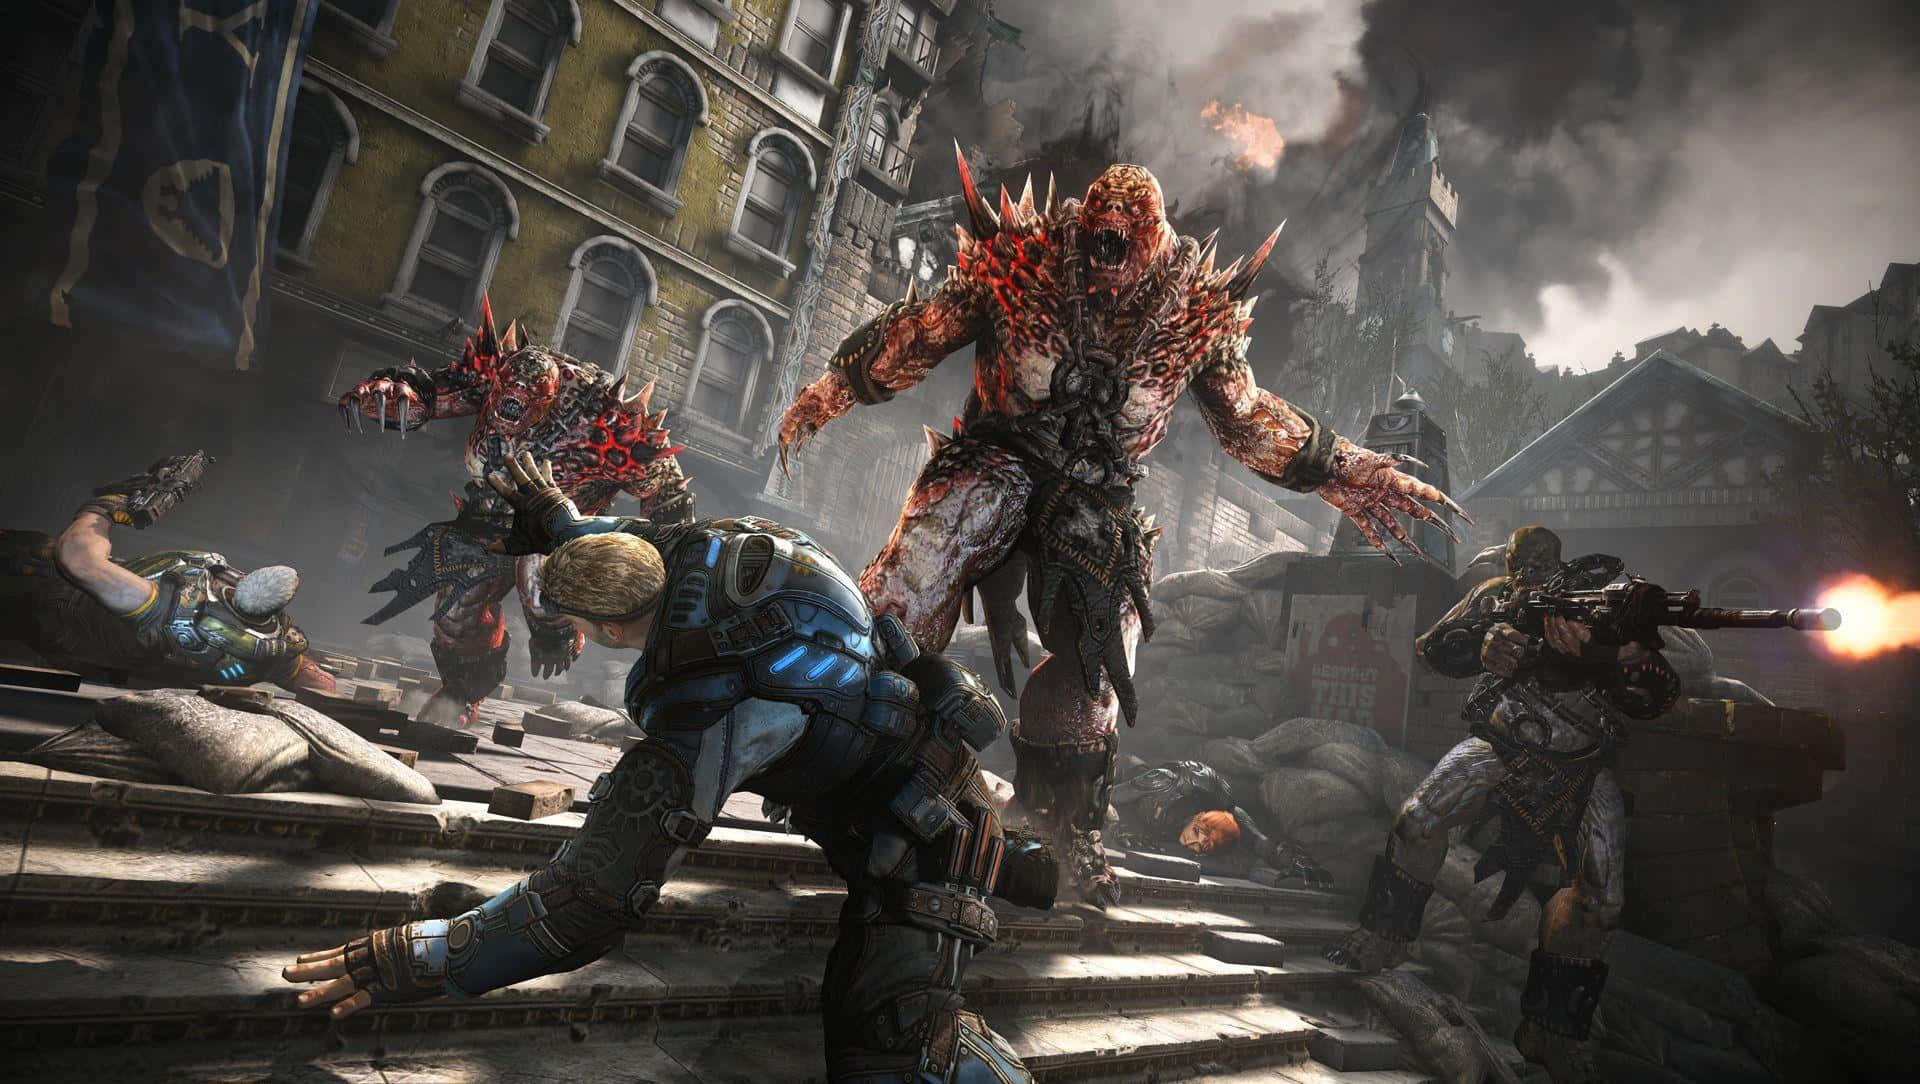 A Group Of Zombies Are Fighting In A City Wallpaper